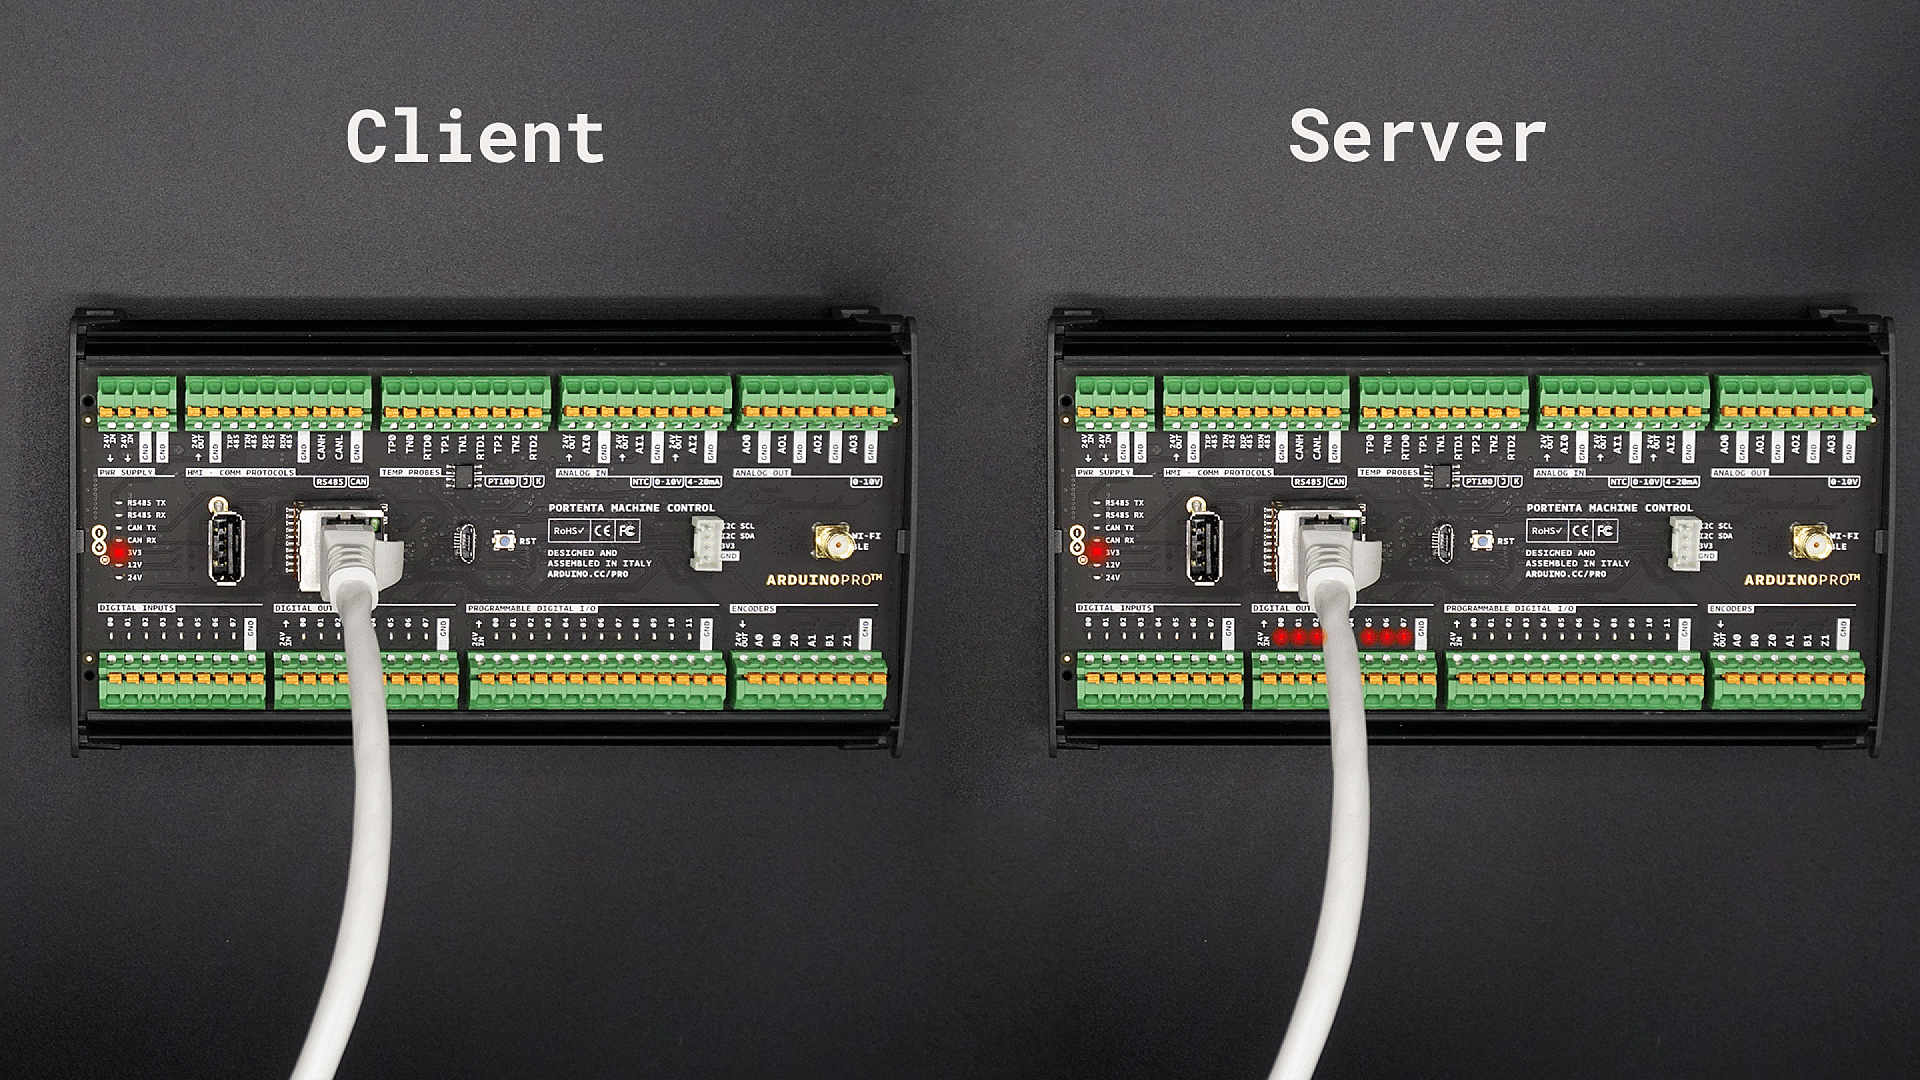 Onboard LEDs of a server device controlled by a Portenta Machine Control via Modbus TCP